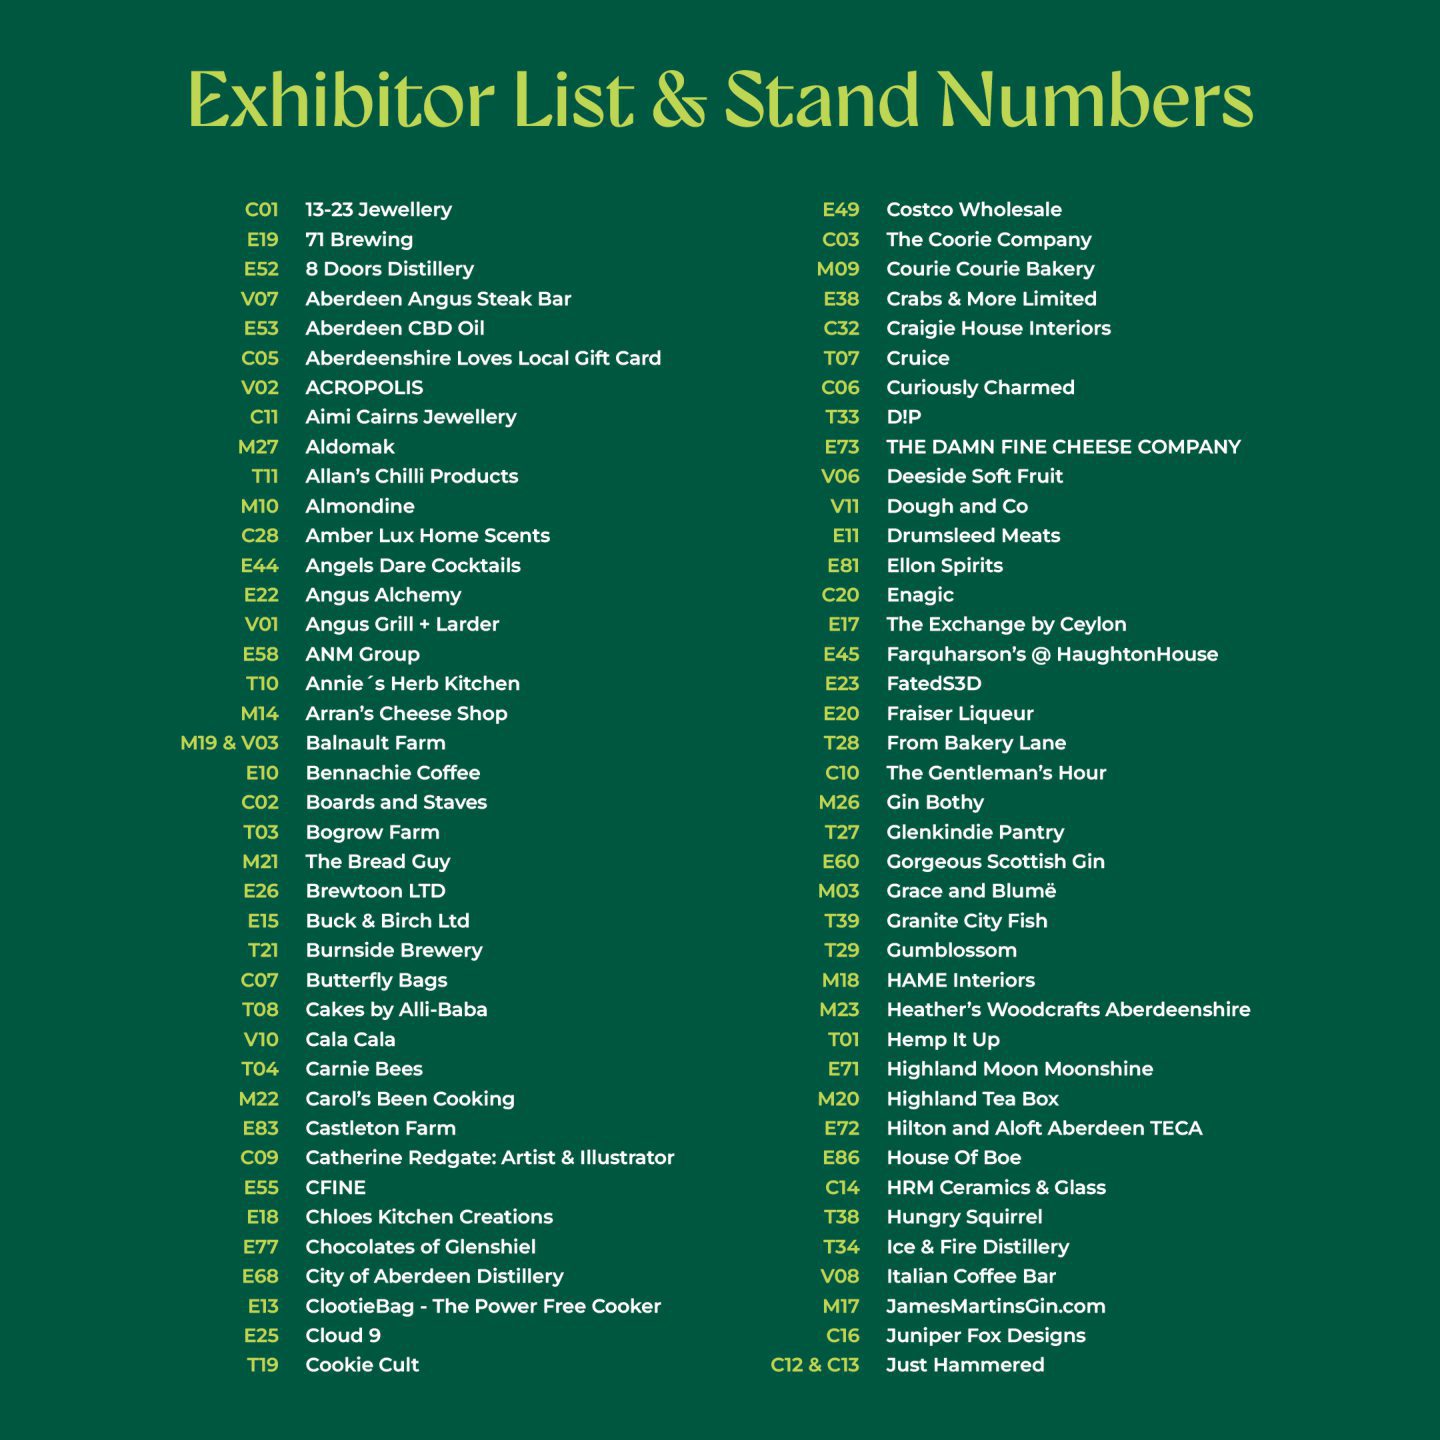 Taste of Grampian Full Exhibitor List with Stand Numbers